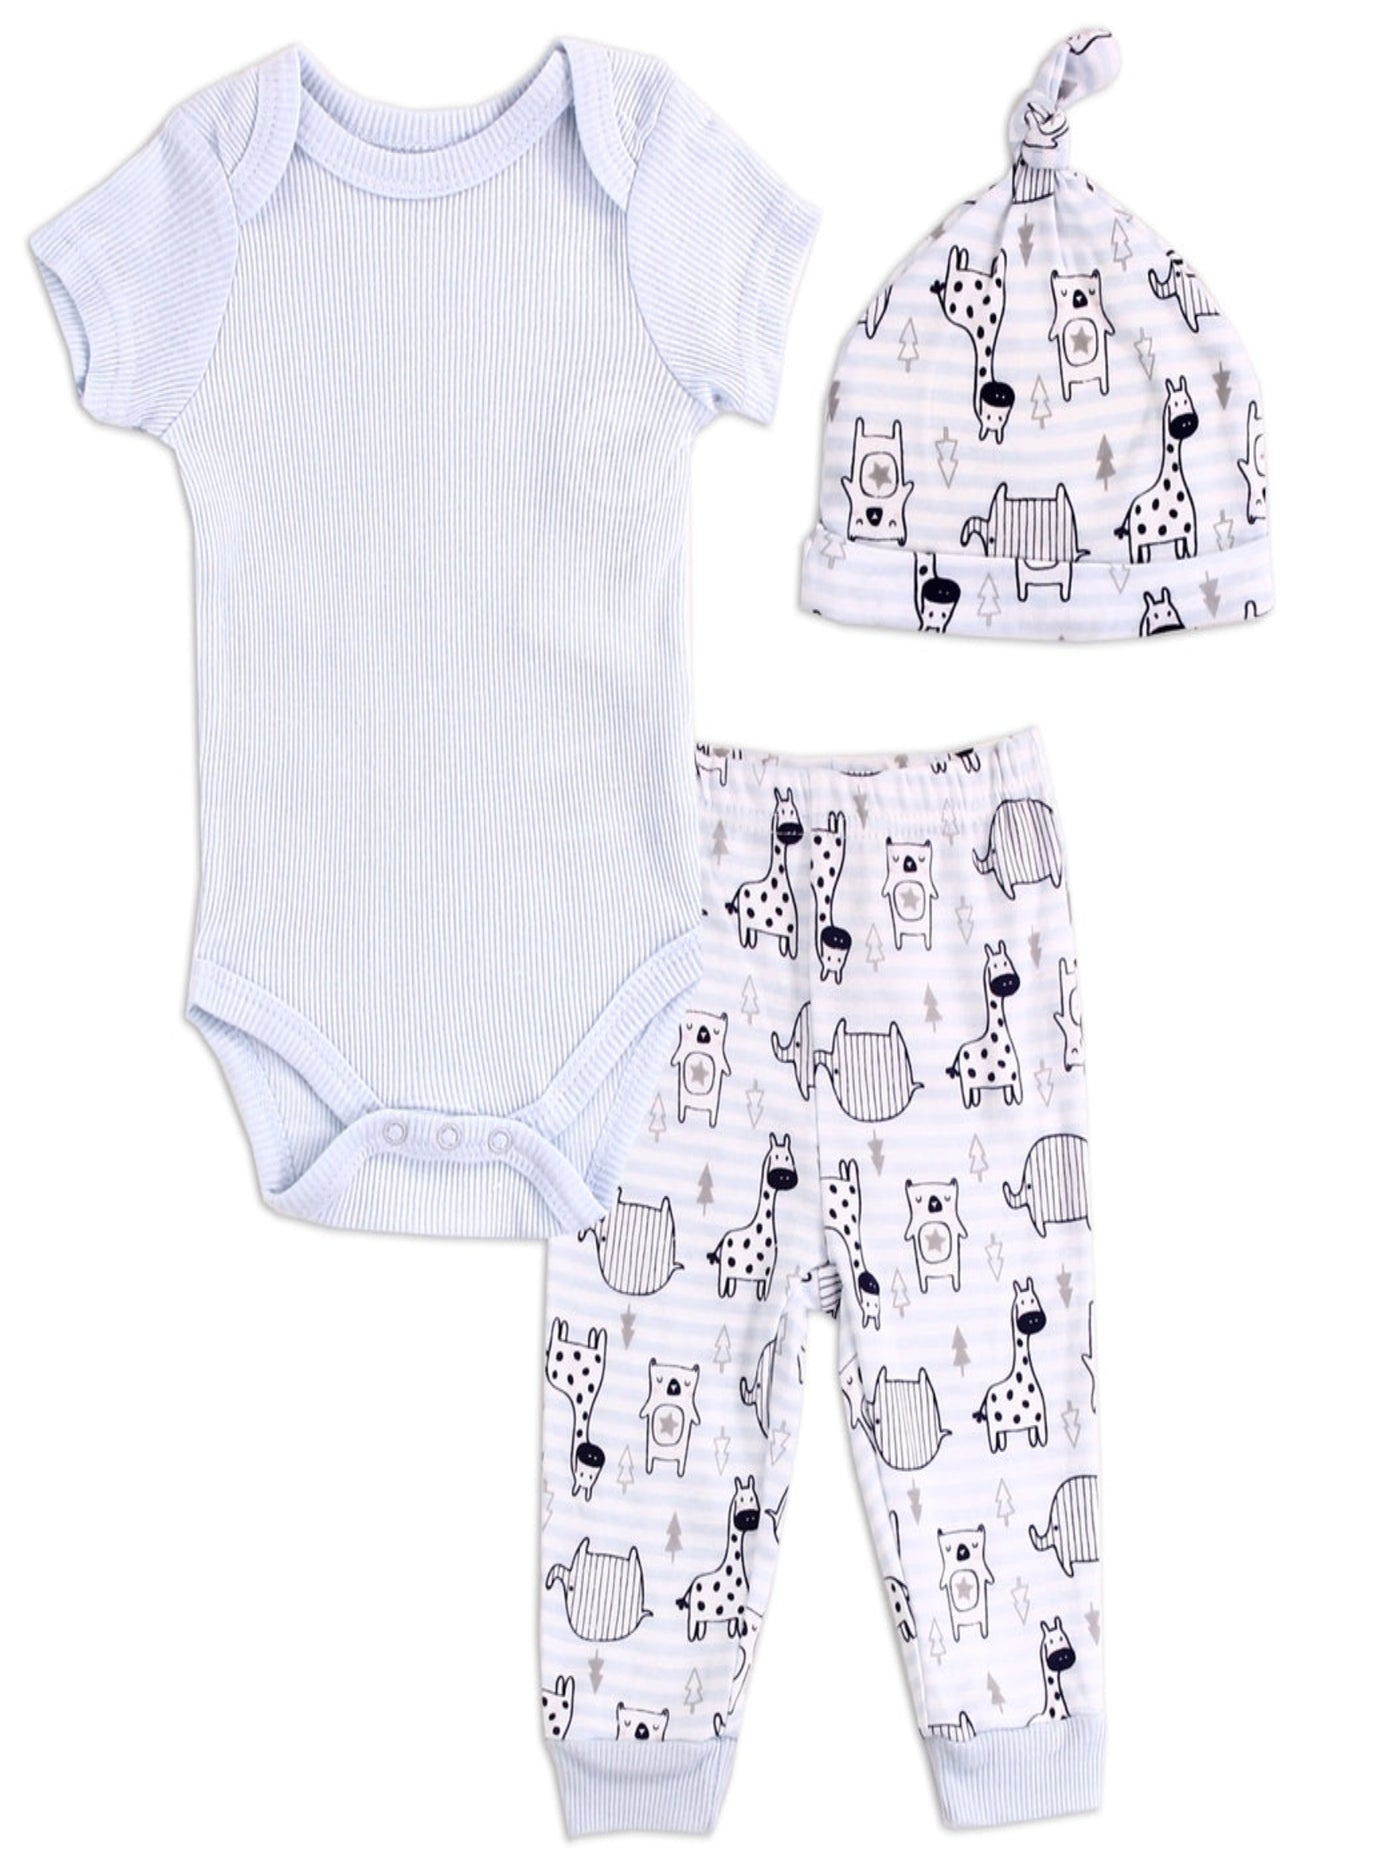 Animal and Stripe Print 3 Piece Baby Outfit, Baby Blue